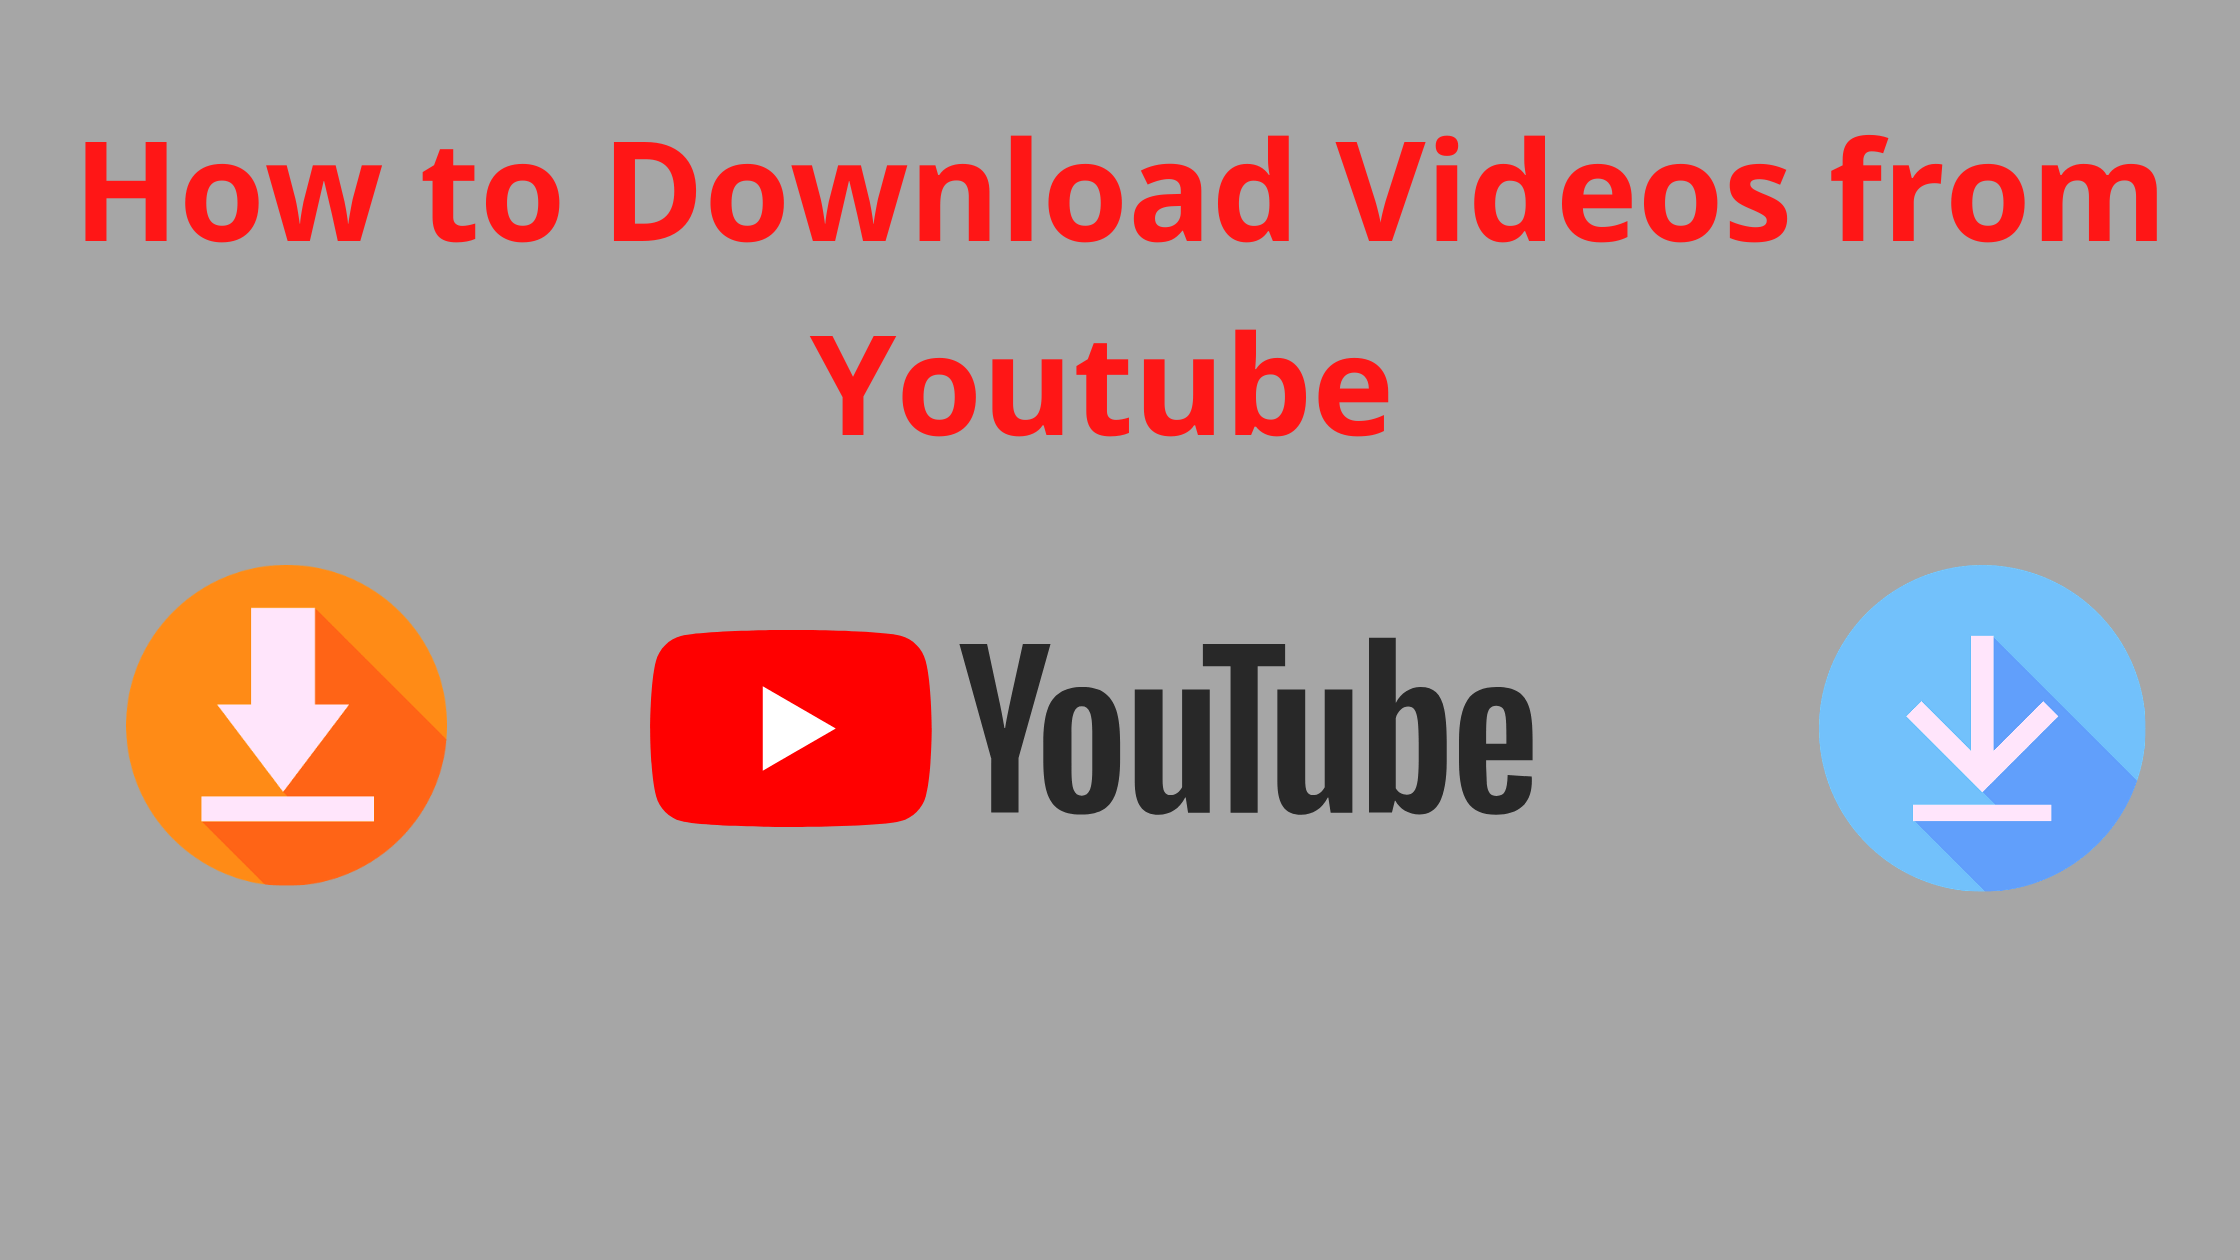 Genyoutube Download YouTube Video for Free in 2022